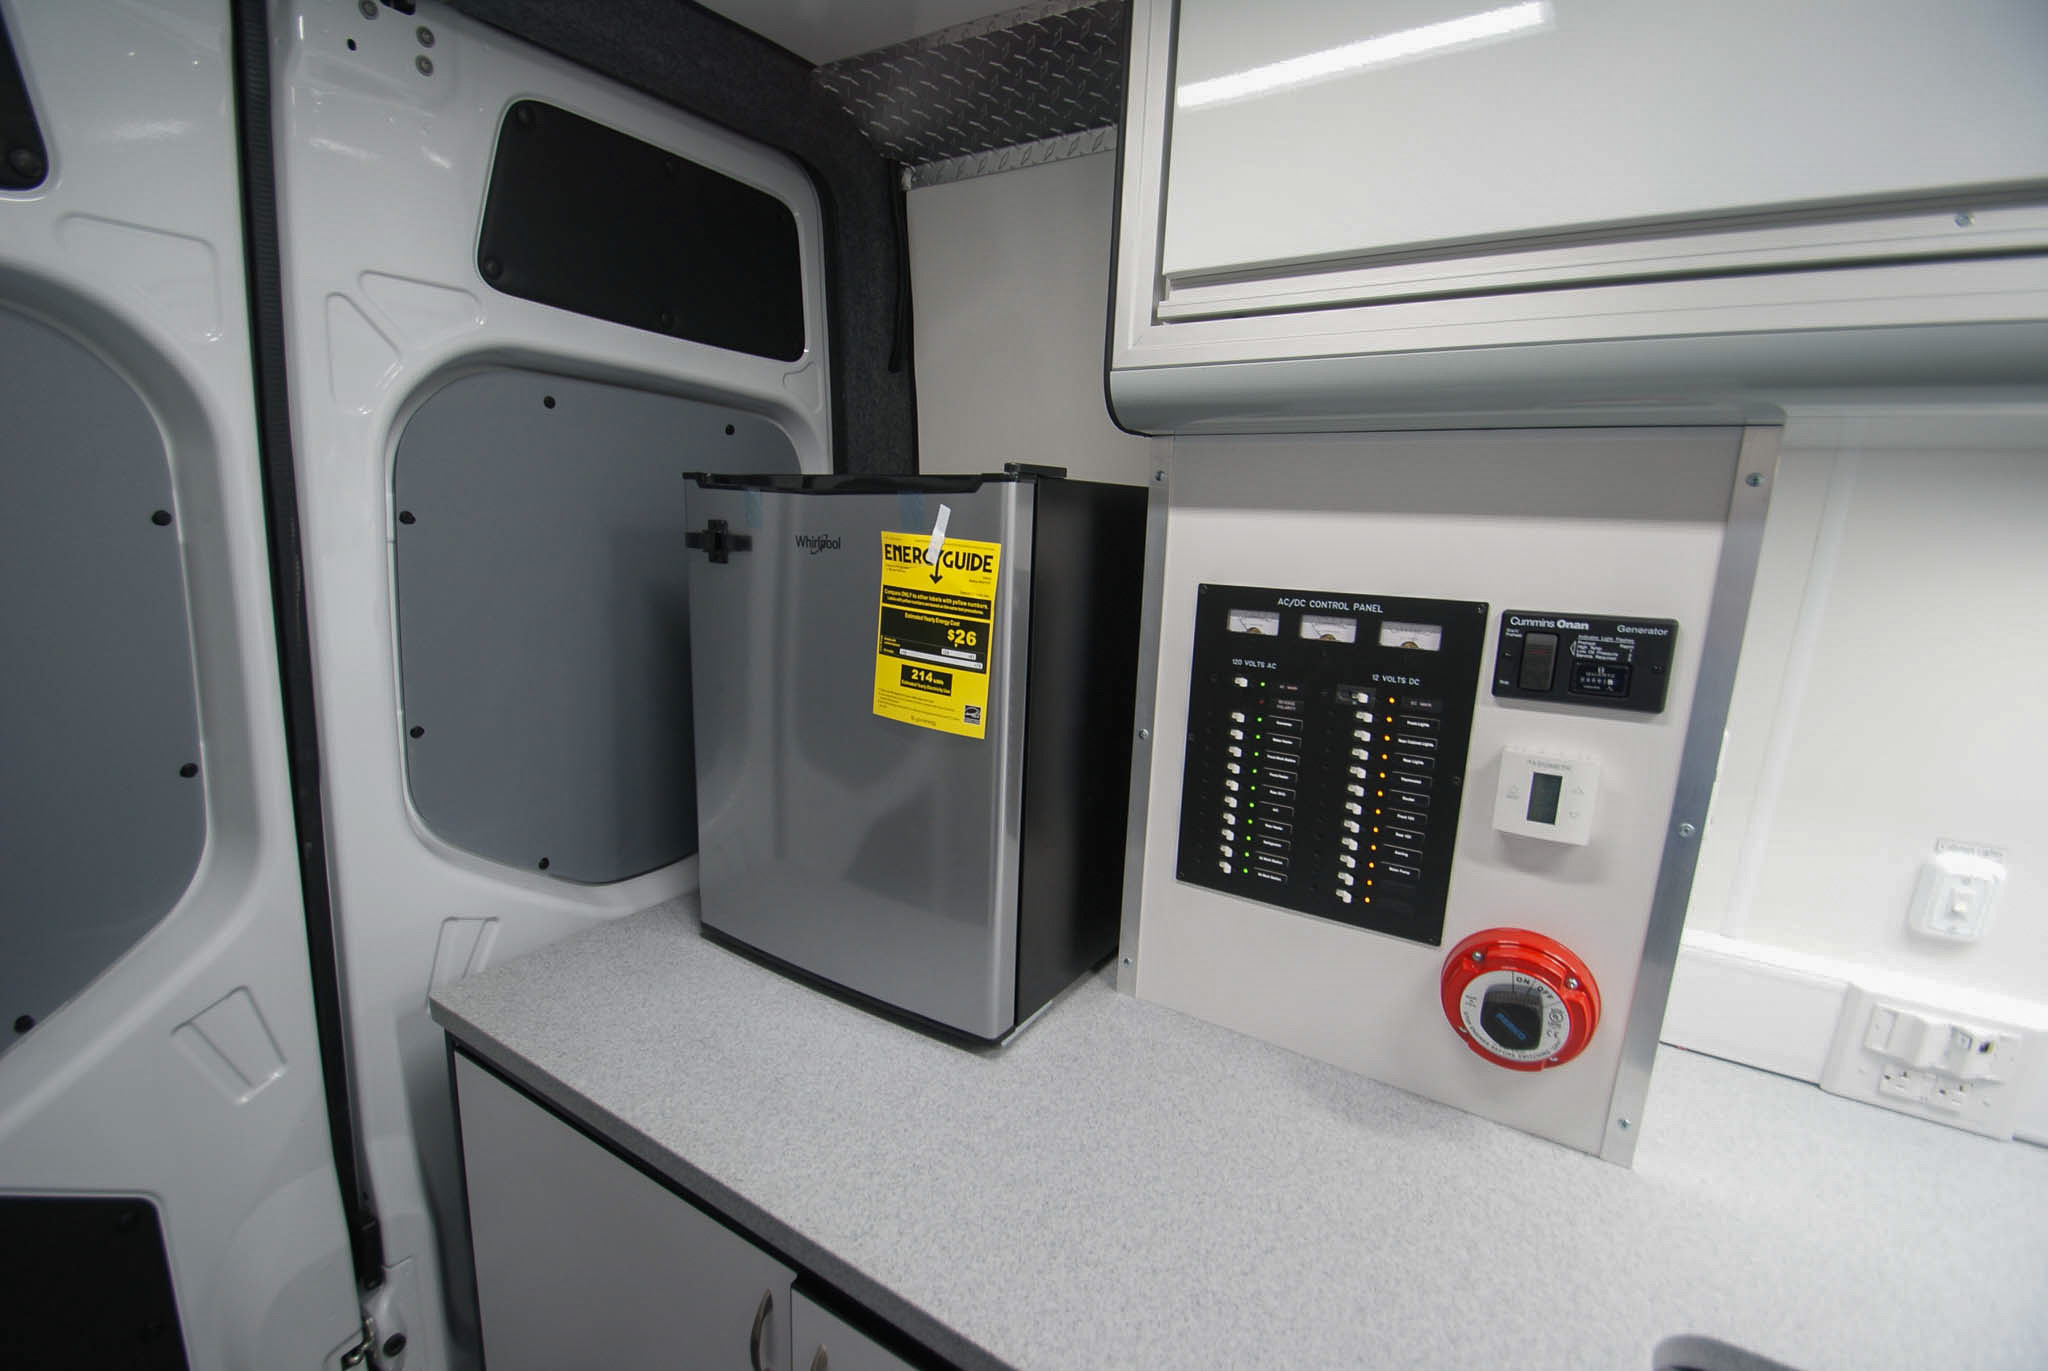 An up close view of the refrigerator and electric control panel in the Mobile Medical Exam sprinter's back room.